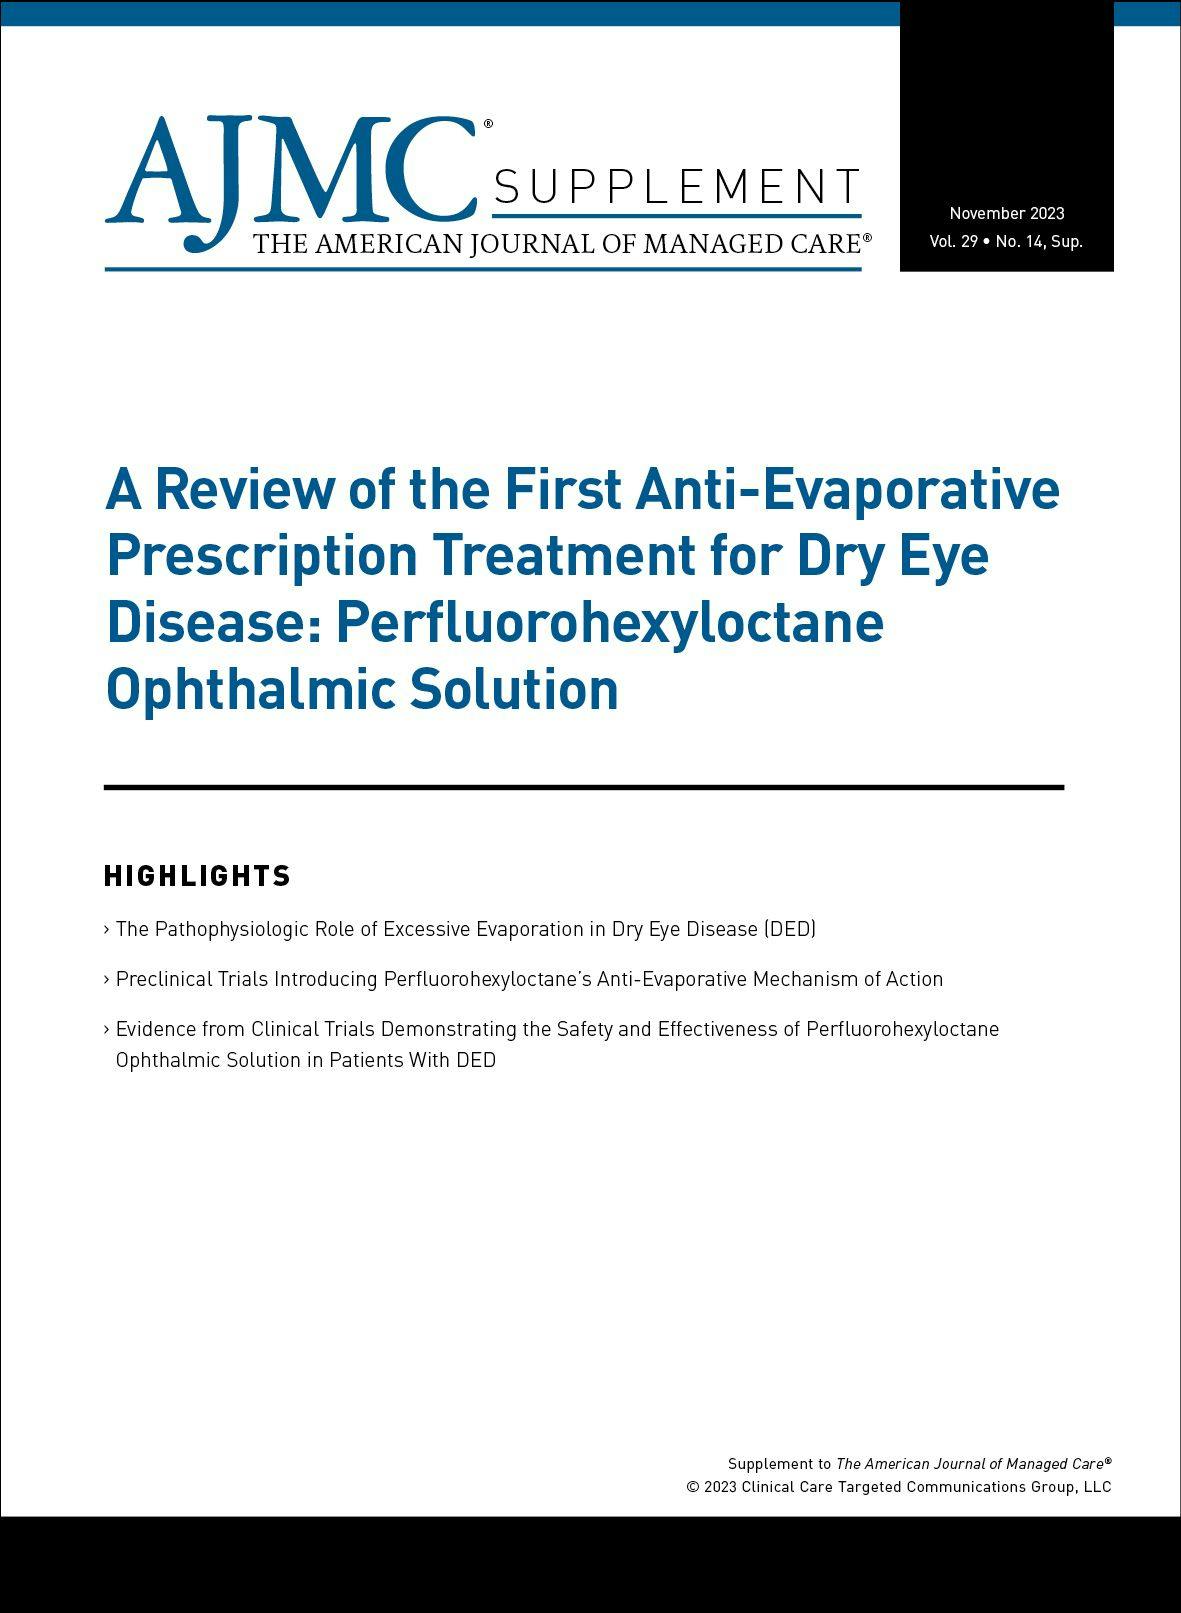 A Review of the First Anti-Evaporative Prescription Treatment for Dry Eye Disease: Perfluorohexyloctane Ophthalmic Solution